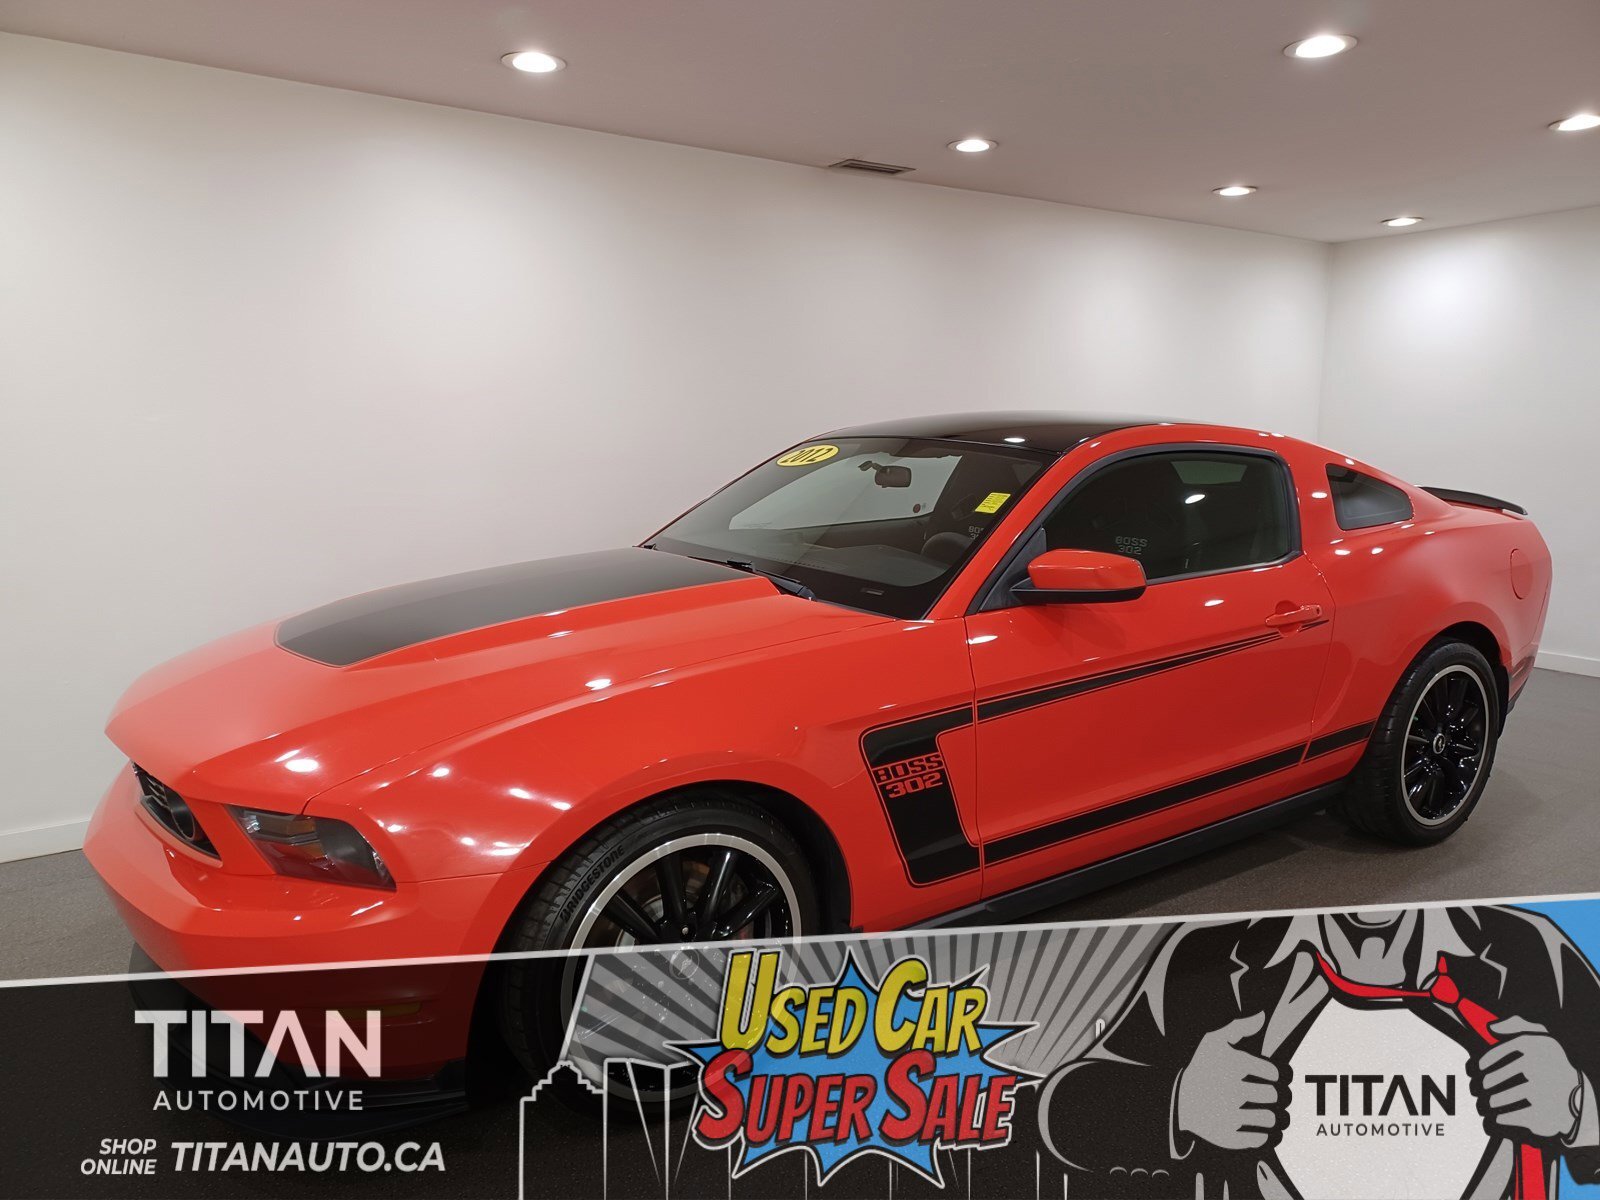 2012 Ford Mustang Boss 302 | 1 of 1135 In Competition Orange | Recar